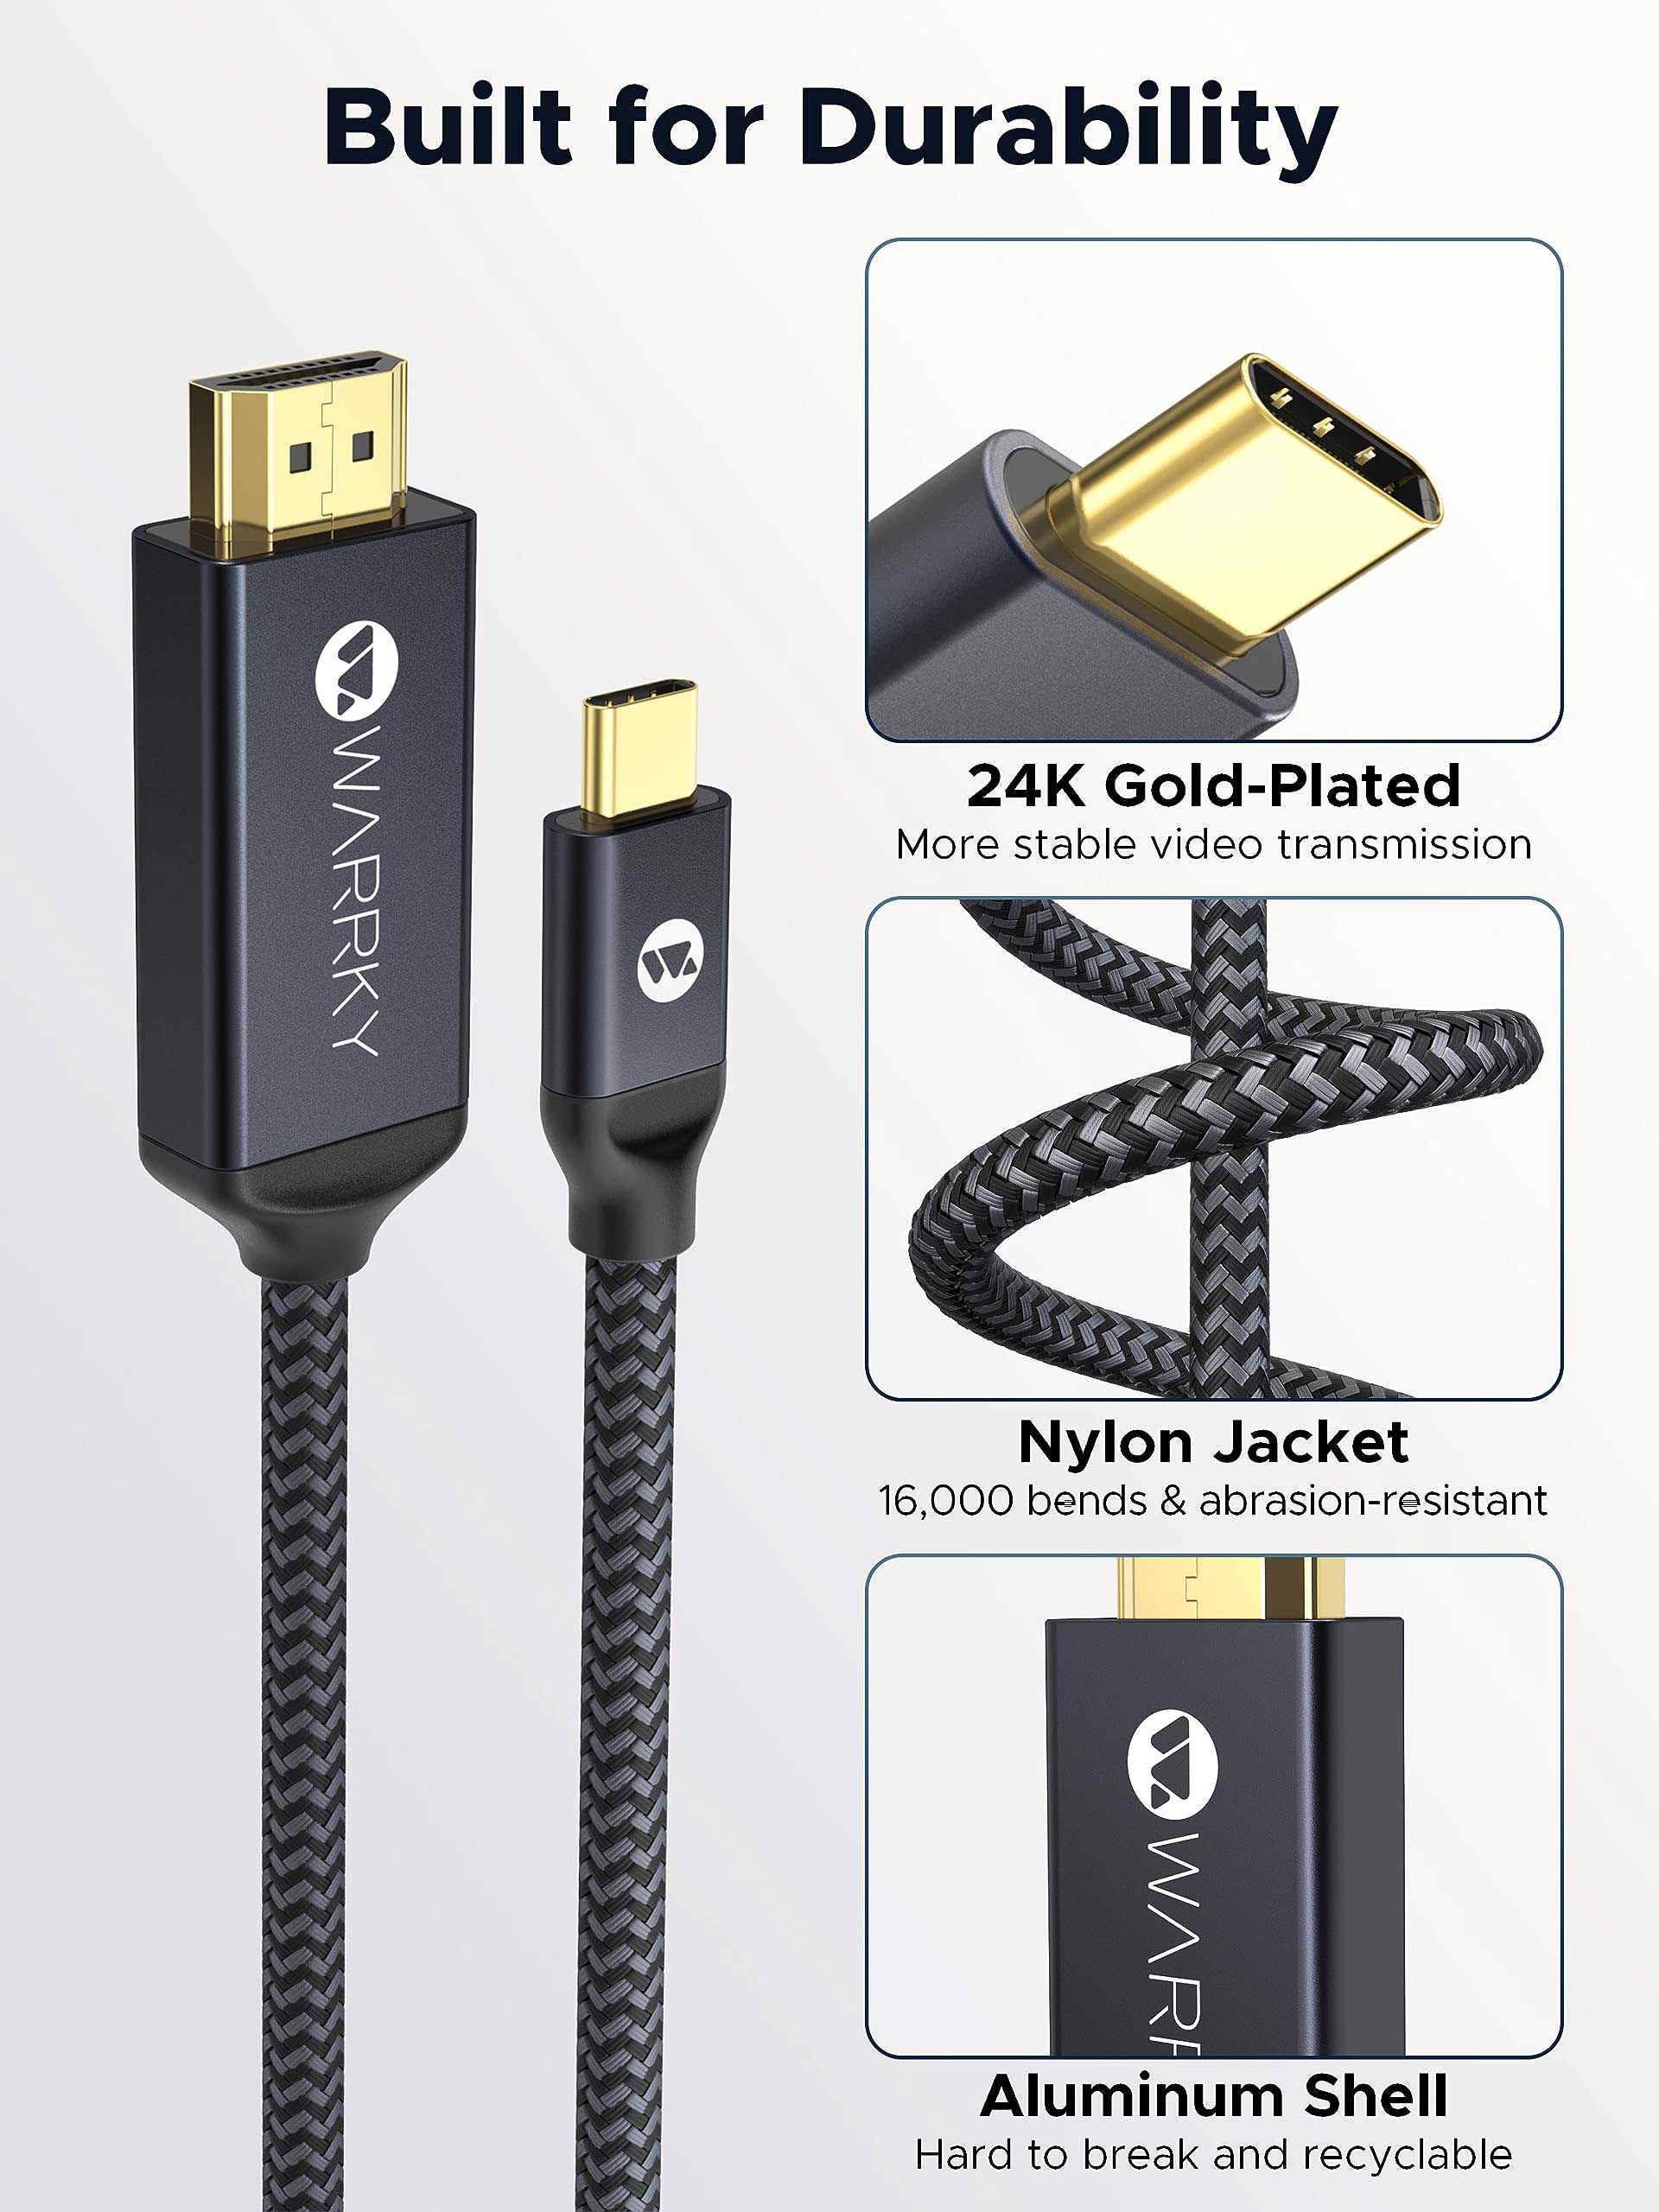 4K 60HZ USB C to HDMI Cable 6ft Midnight Blue